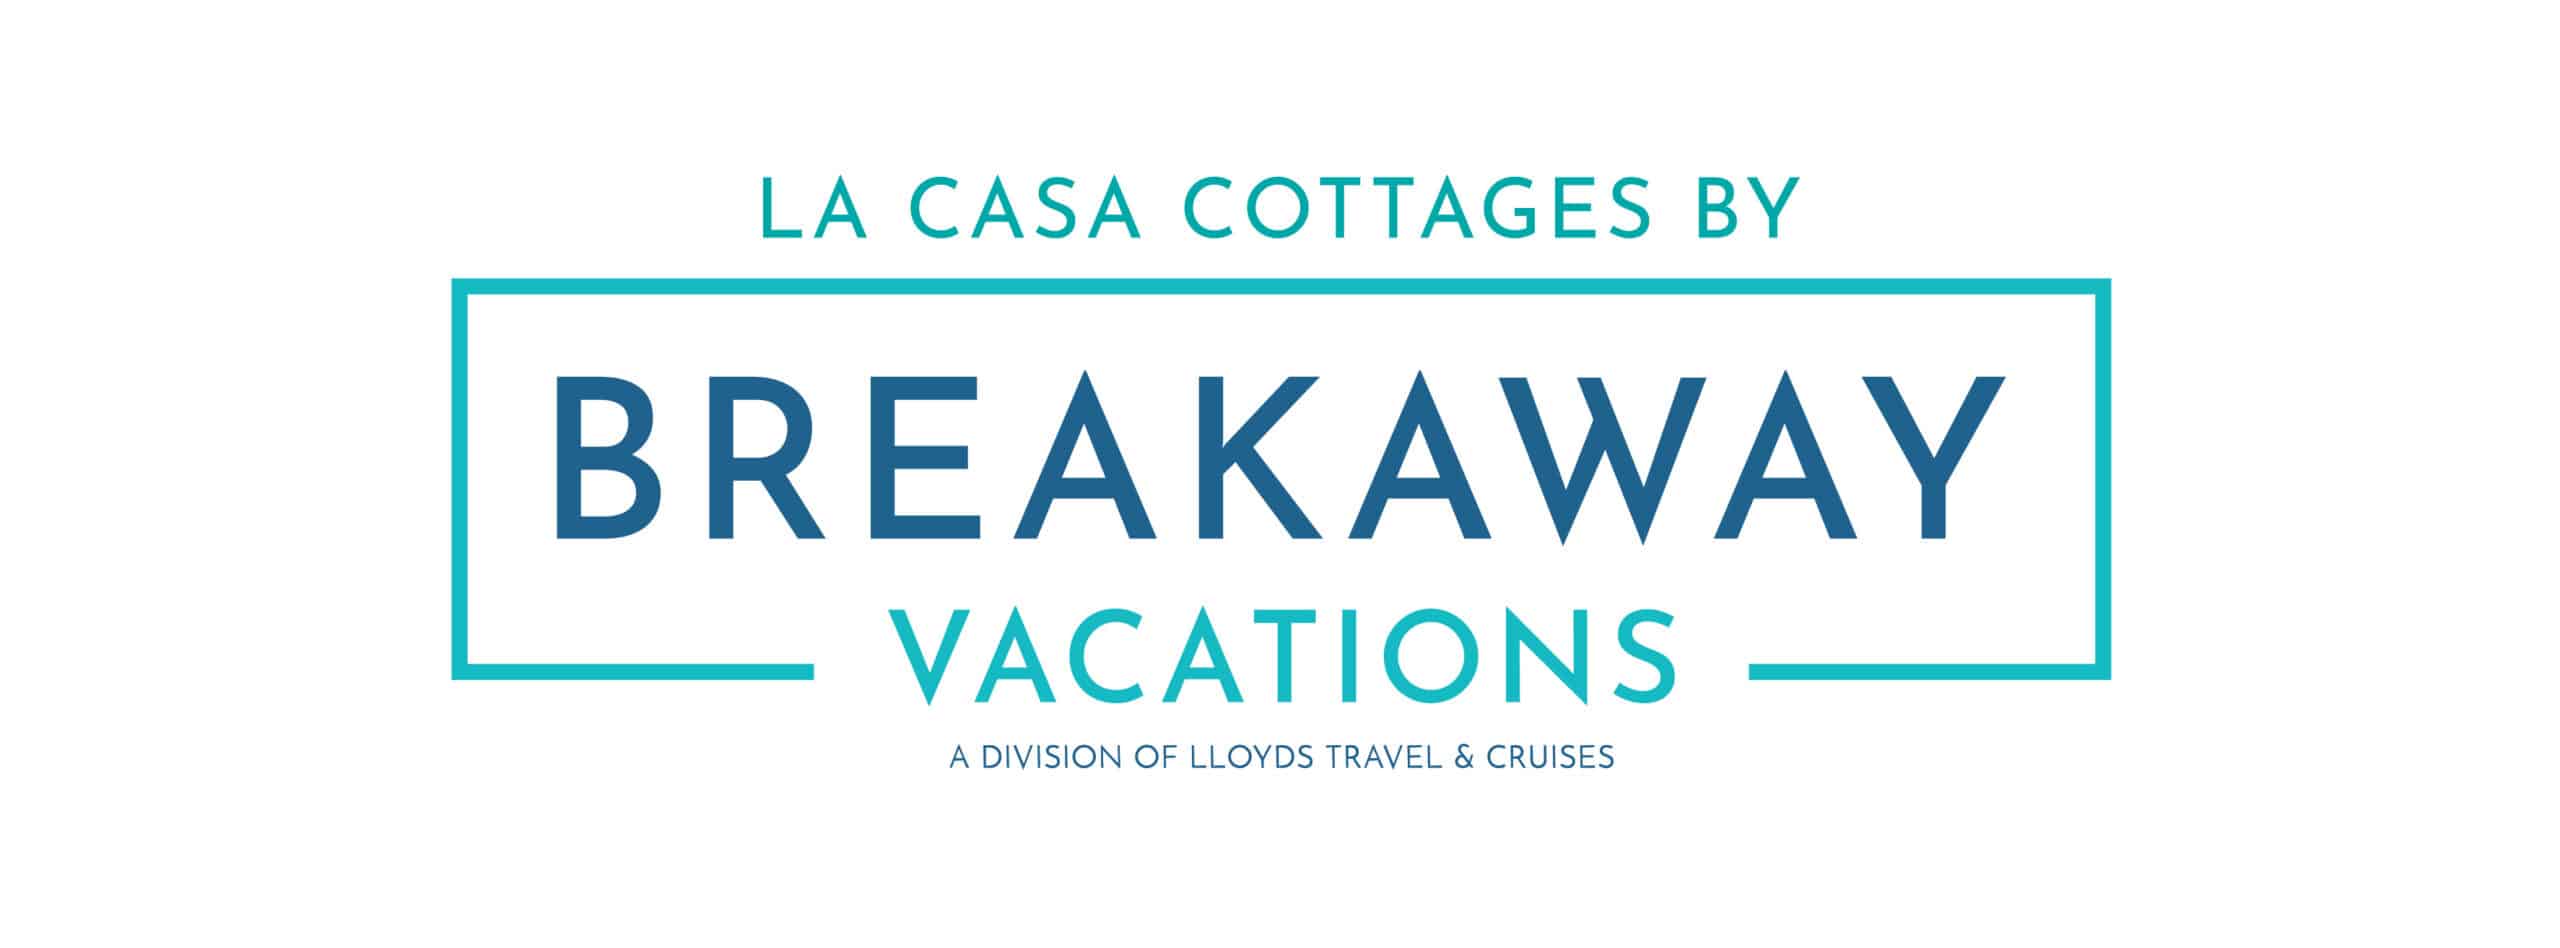 La Casa Cottages by Breakaway Vacations